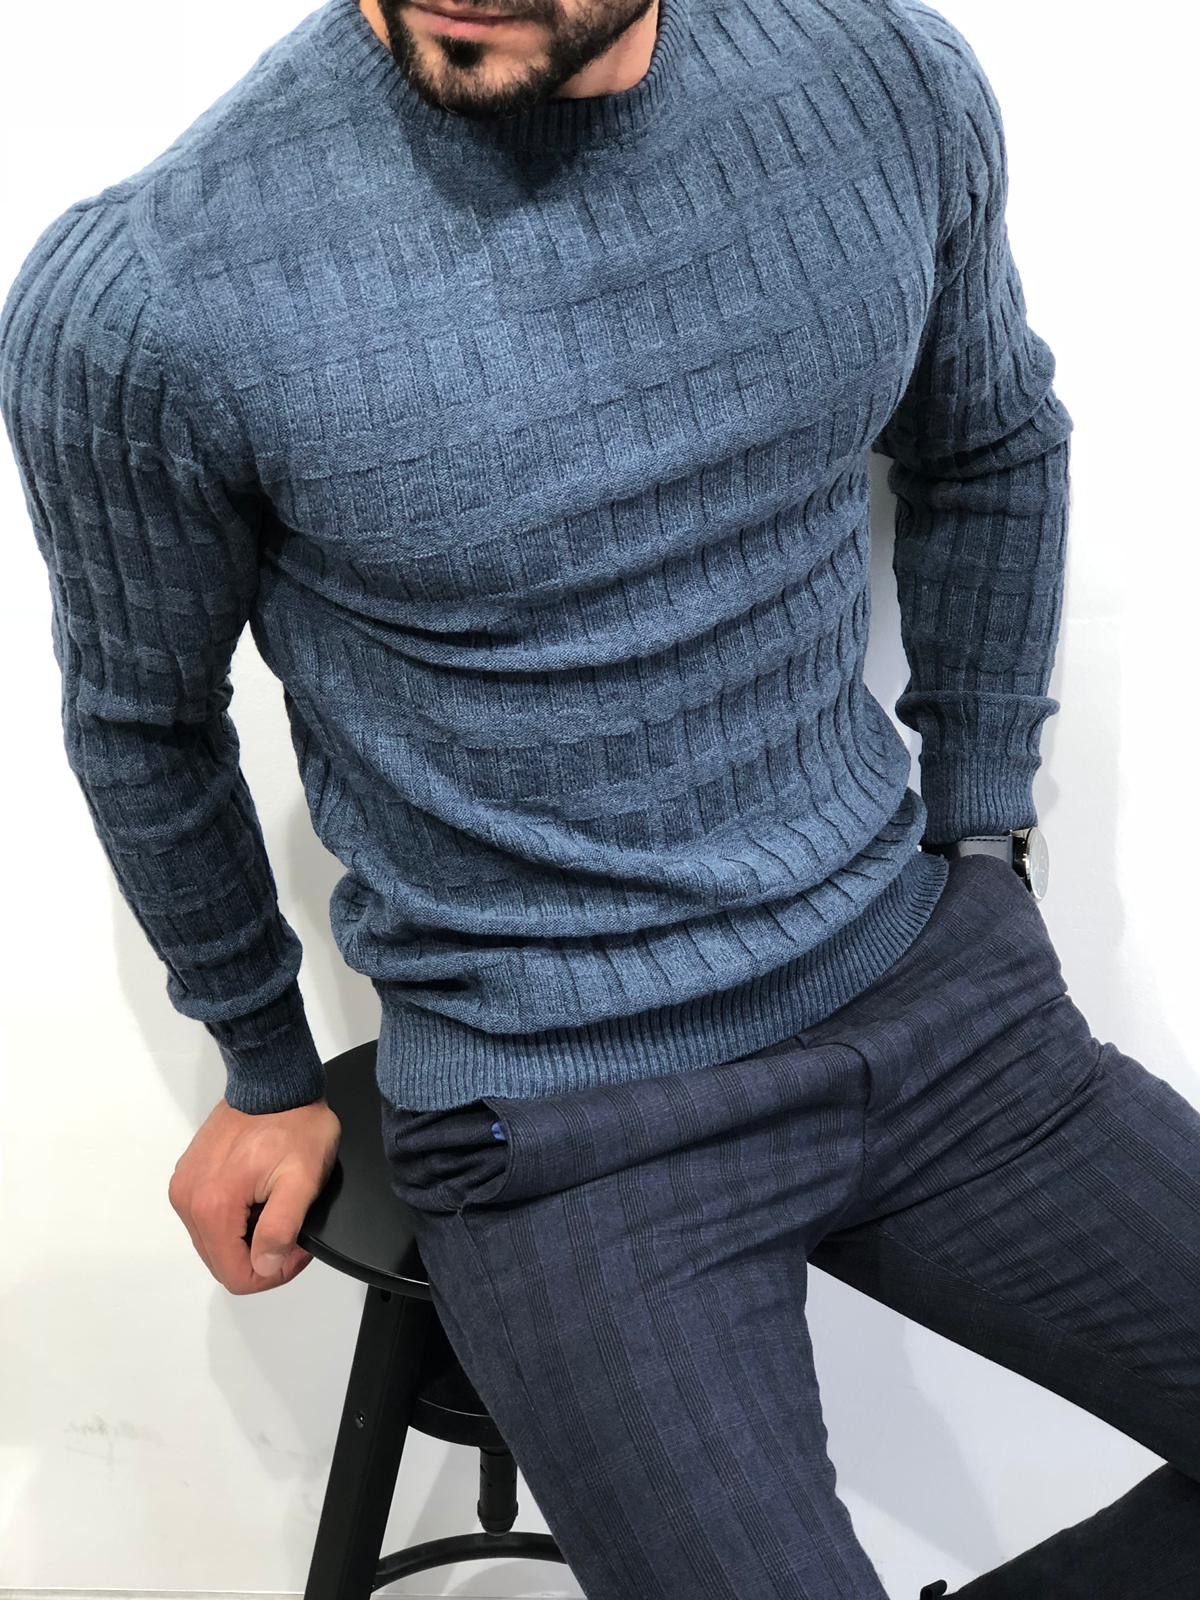 Buy Blue Slim Fit Sweater by Gentwith.com with Free Shipping